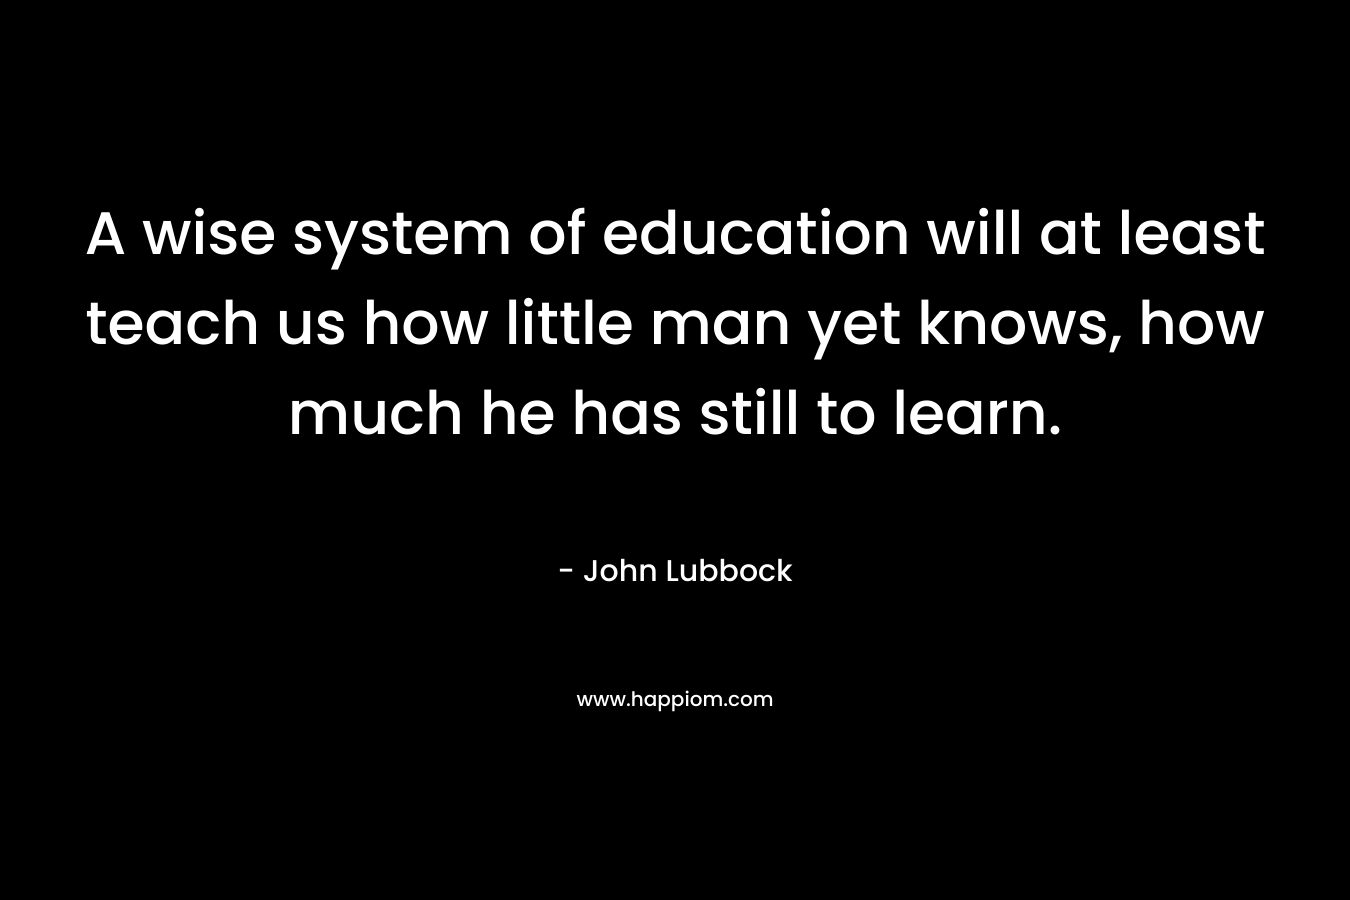 A wise system of education will at least teach us how little man yet knows, how much he has still to learn.